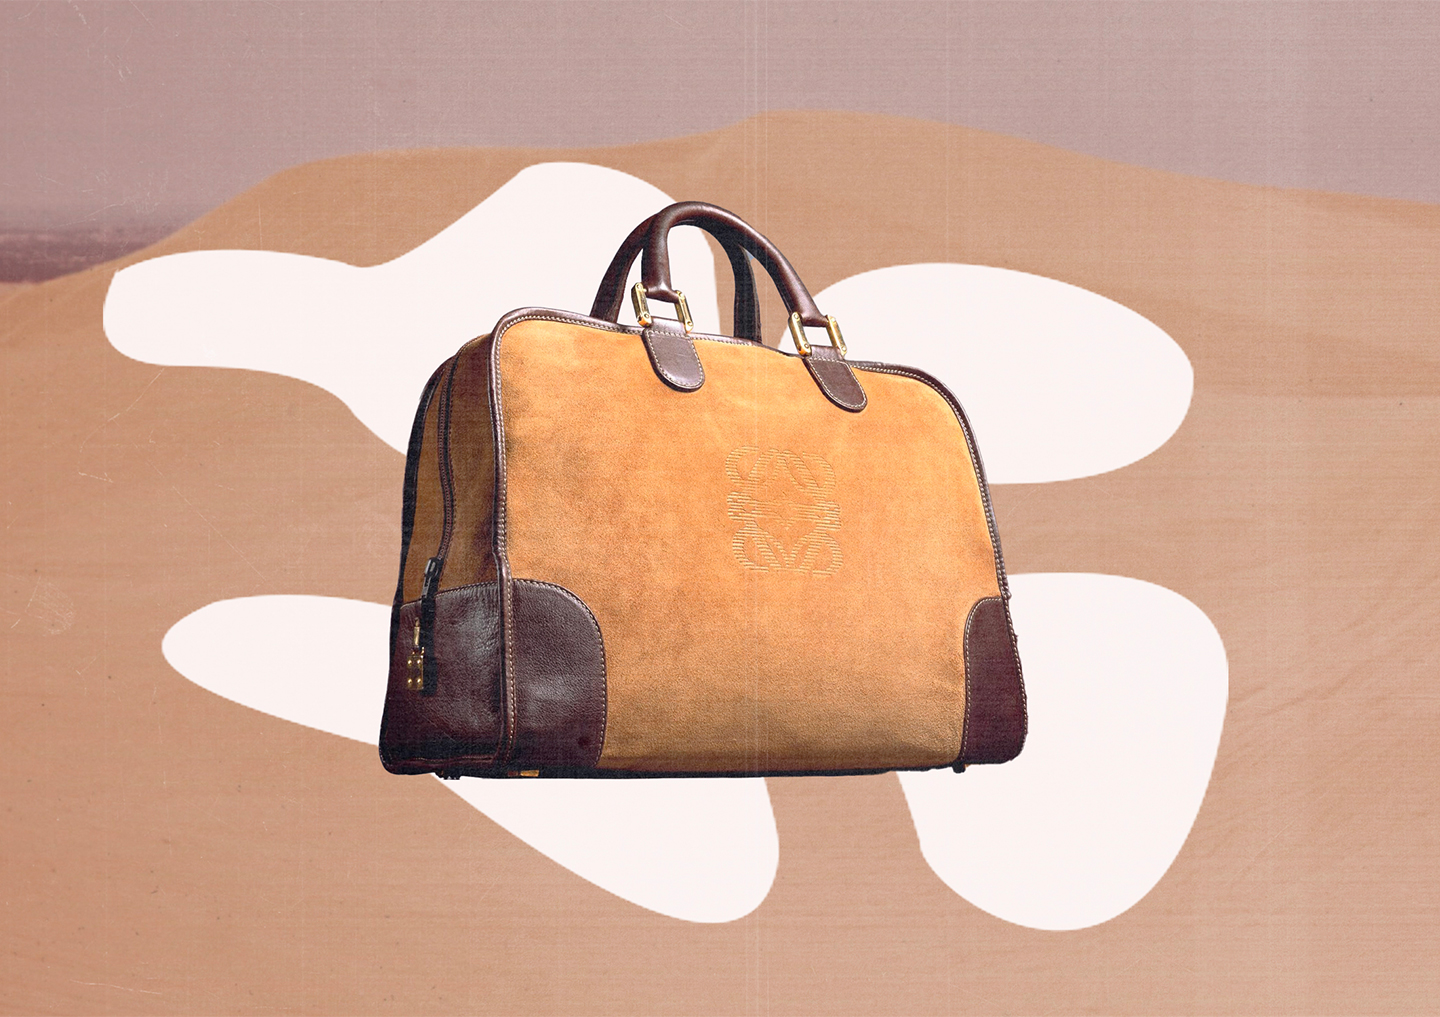 Loewe's Amazona bag, launched in 1975 and celebrated for its fine leather 